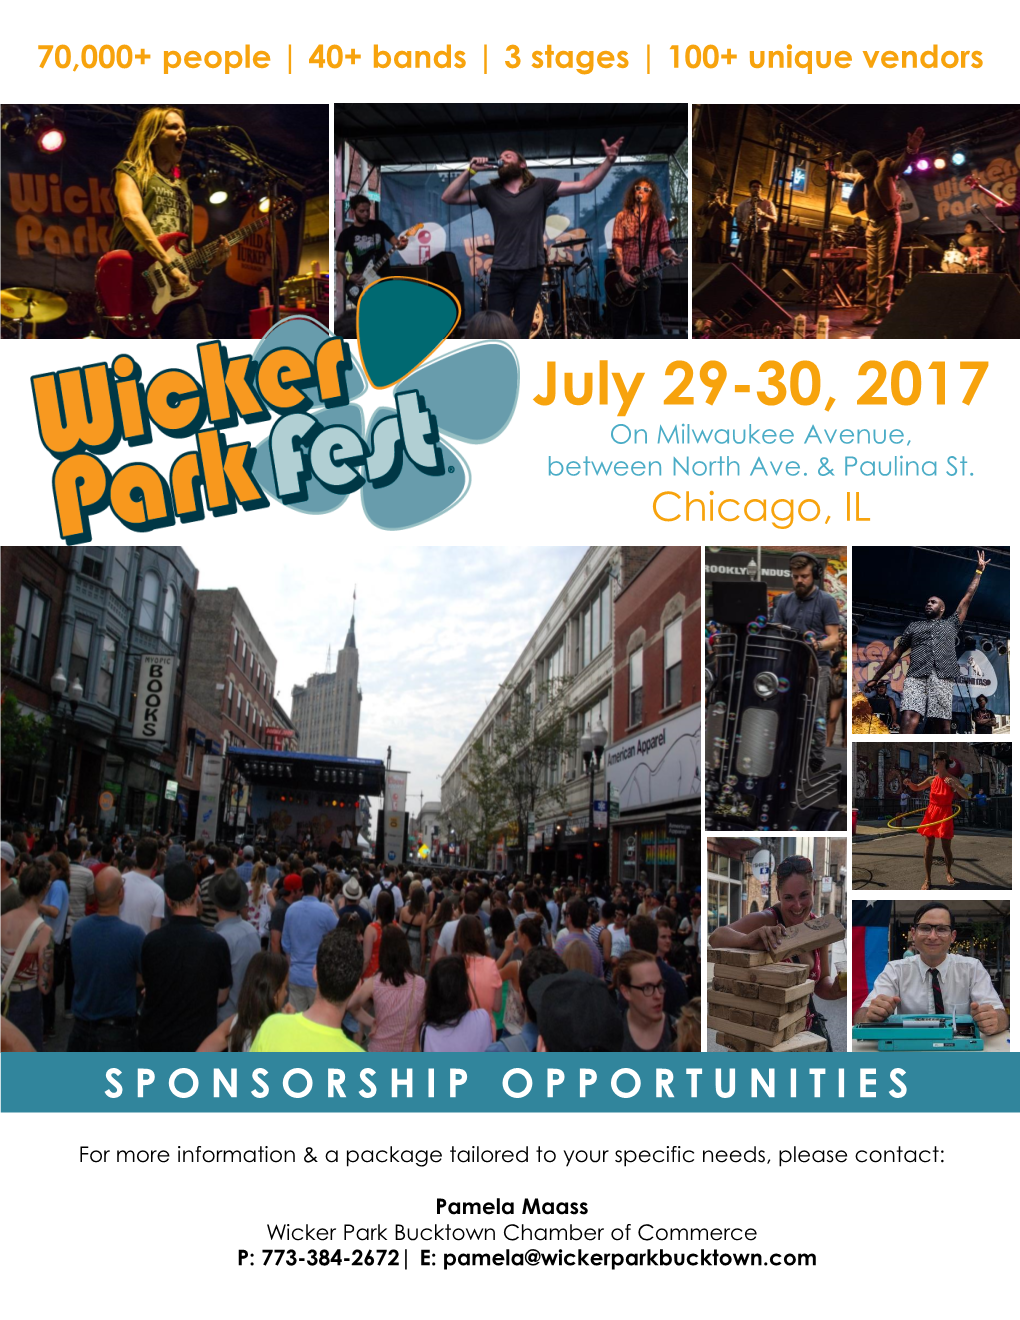 July 29-30, 2017 on Milwaukee Avenue, Between North Ave